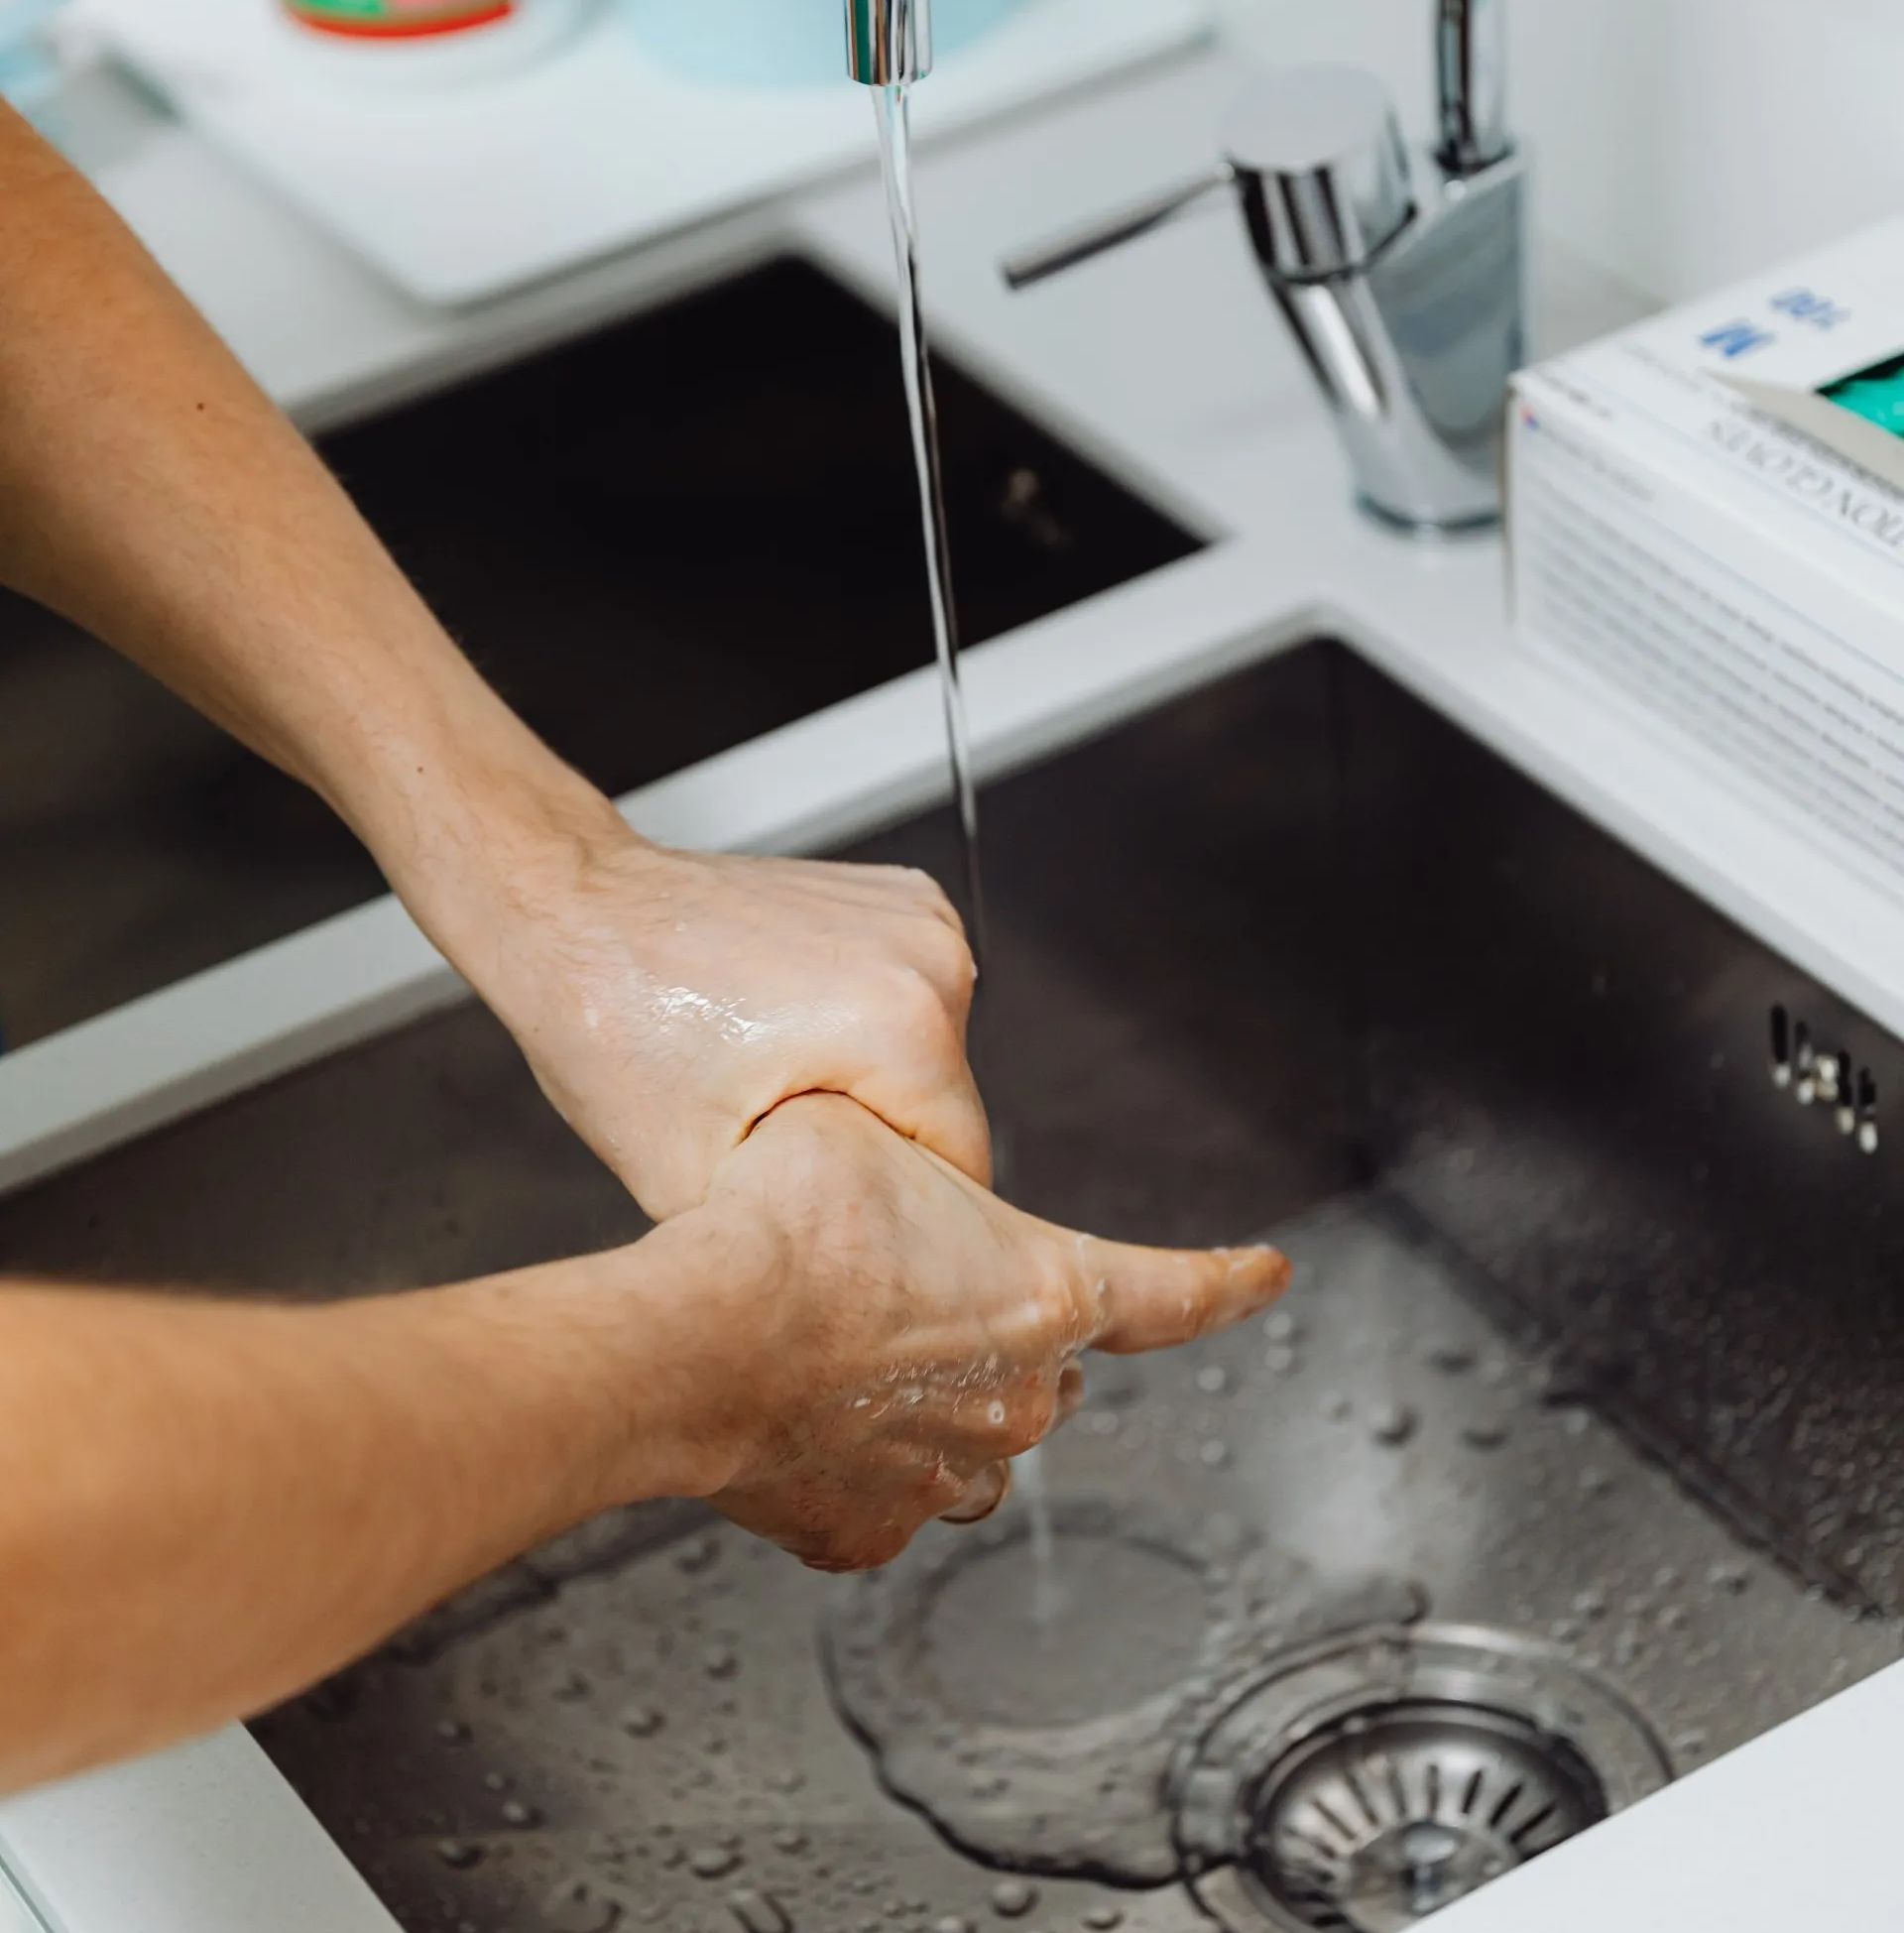 Learn how to prevent clogged drains with these simple tips from our plumbing experts. Keep your plumbing system running smoothly!